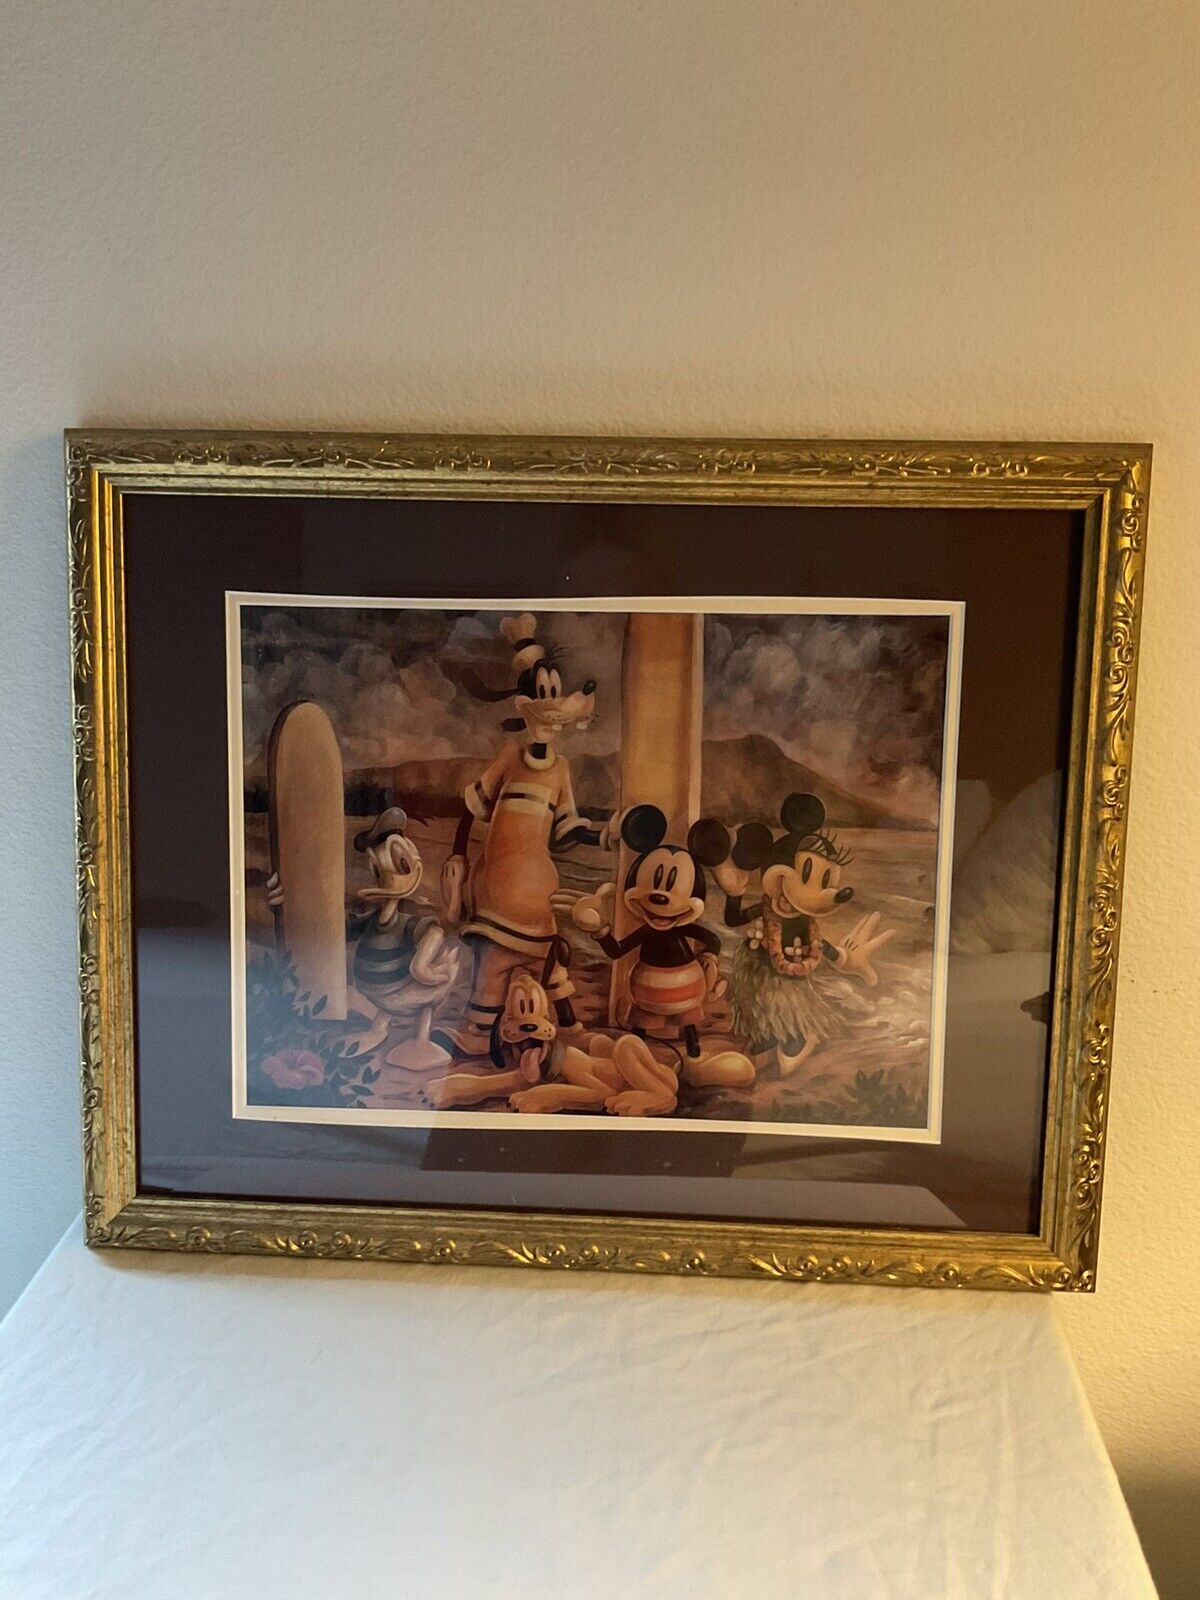 Disneyland Framed Print From Diseyna Surf Picture W/ Characters 20x16 Limited Ed